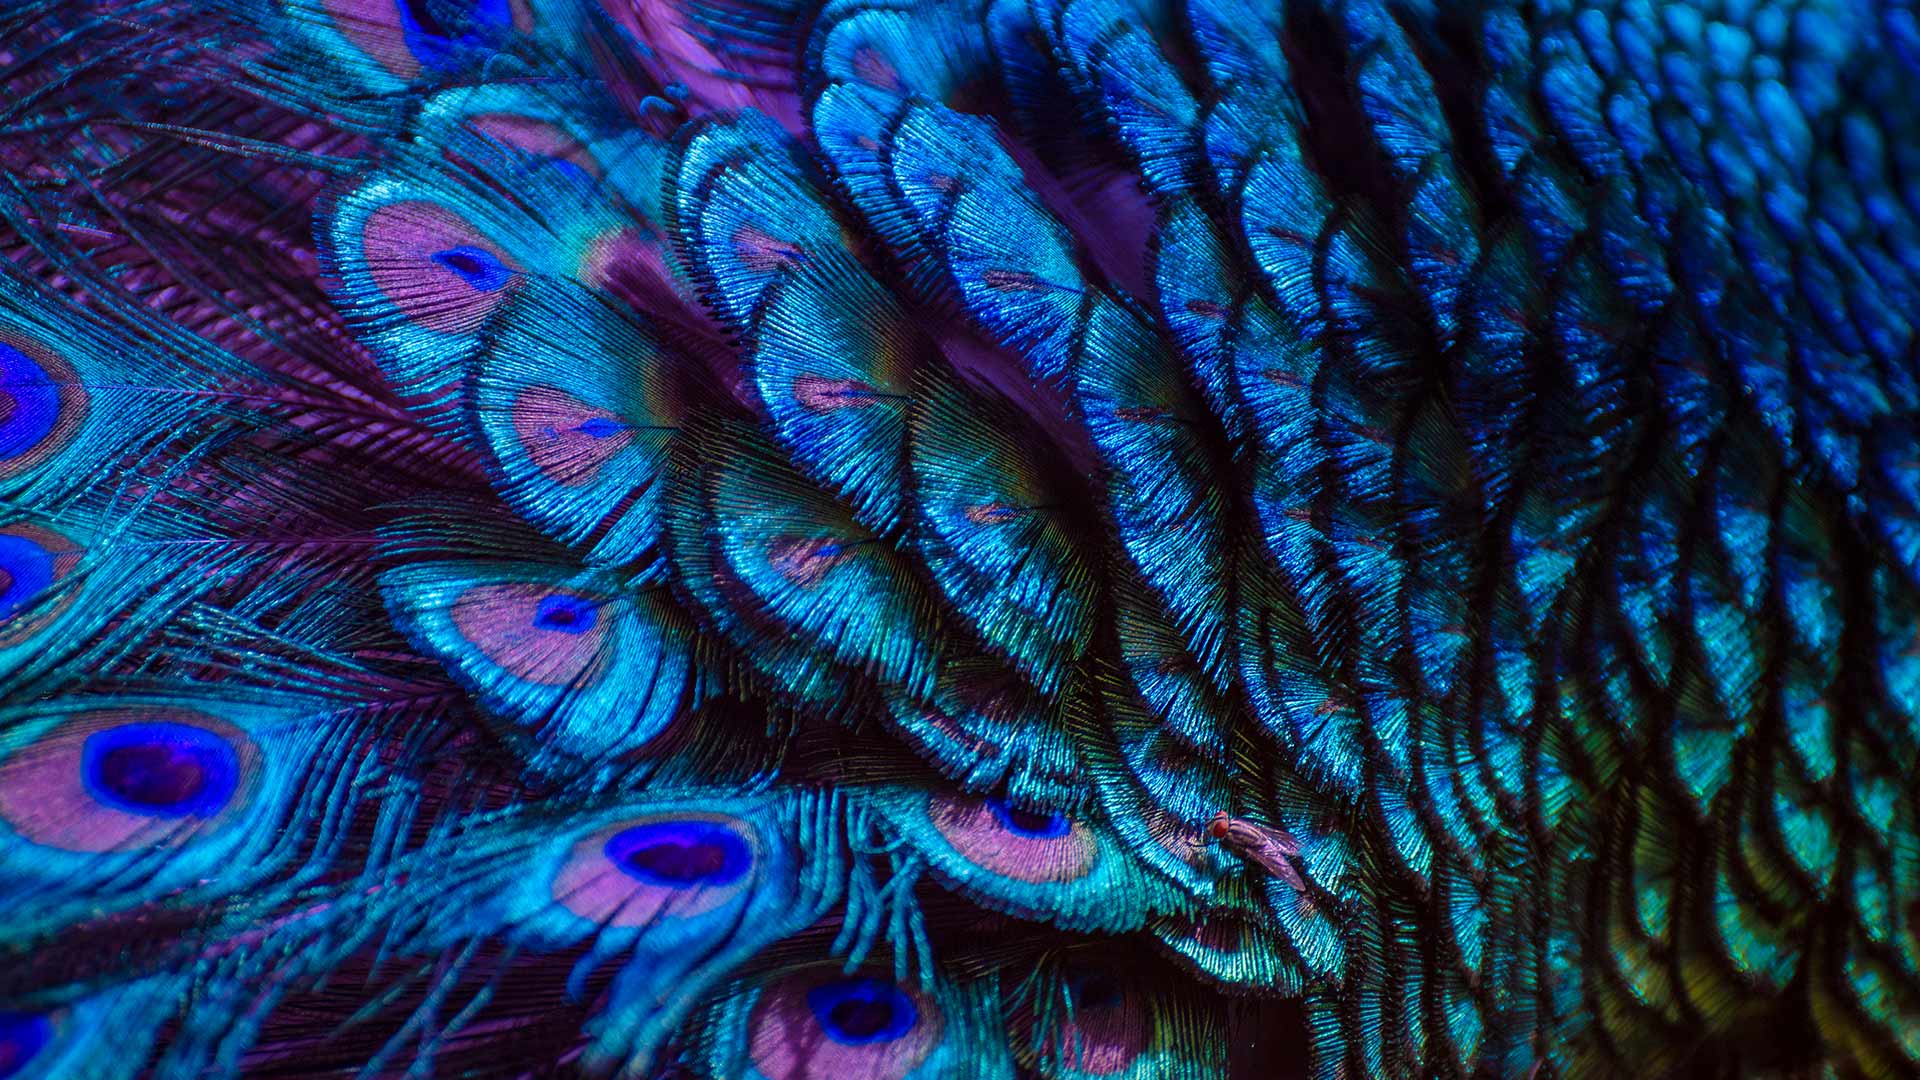 Bing image: Bright and colorful peacock feathers - Bing Wallpaper Gallery